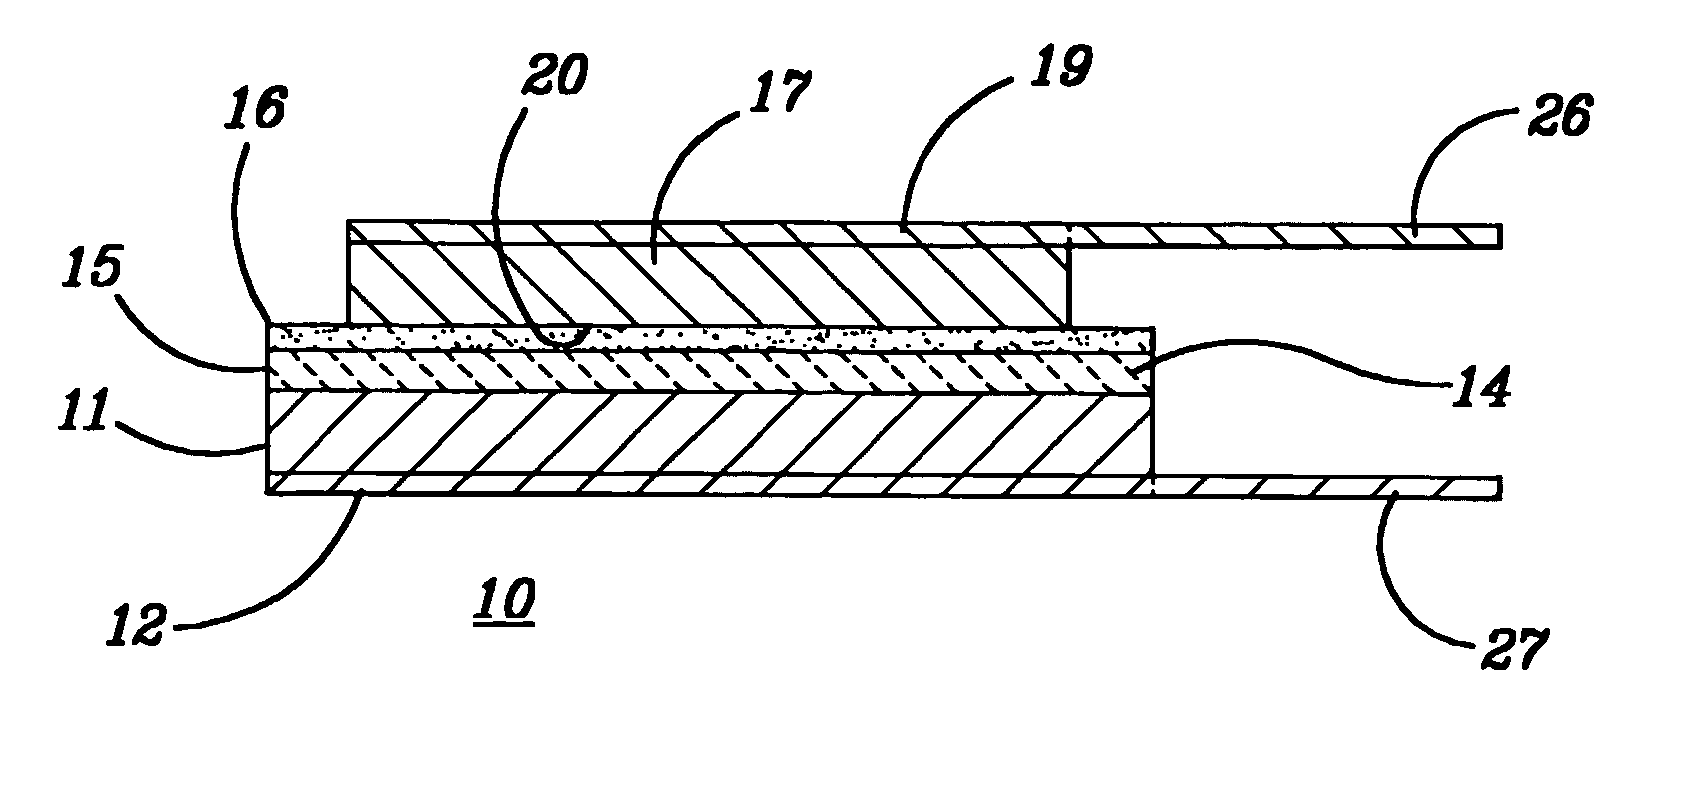 Lithium based electrochemical devices having a ceramic separator glued therein by an ion conductive adhesive